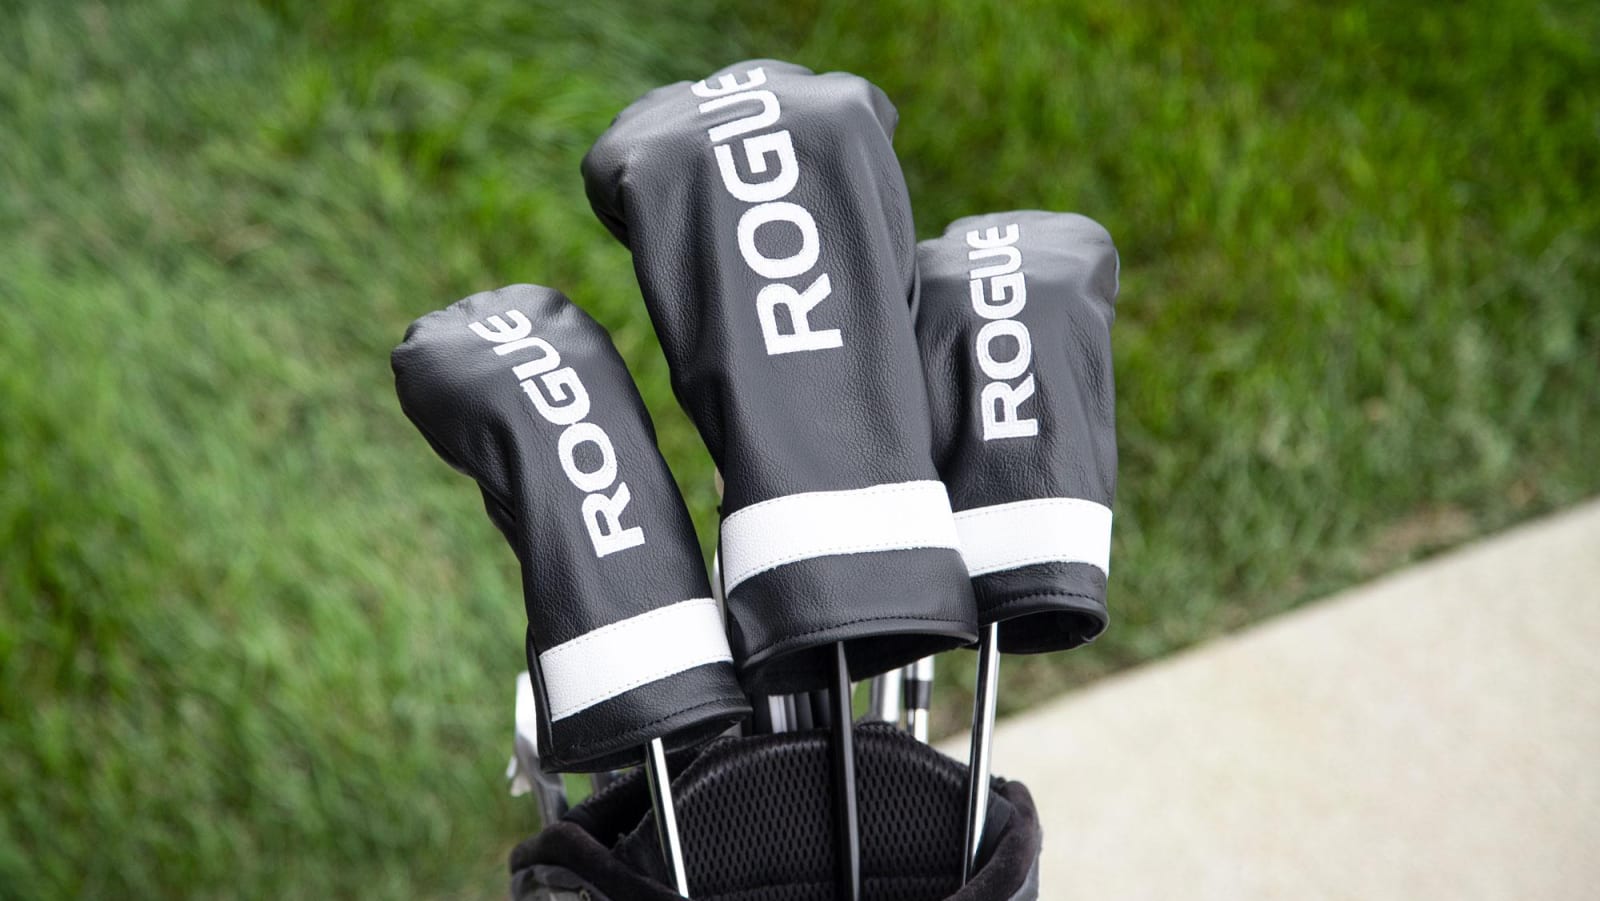 Bringing You the Best Golf Putter Covers